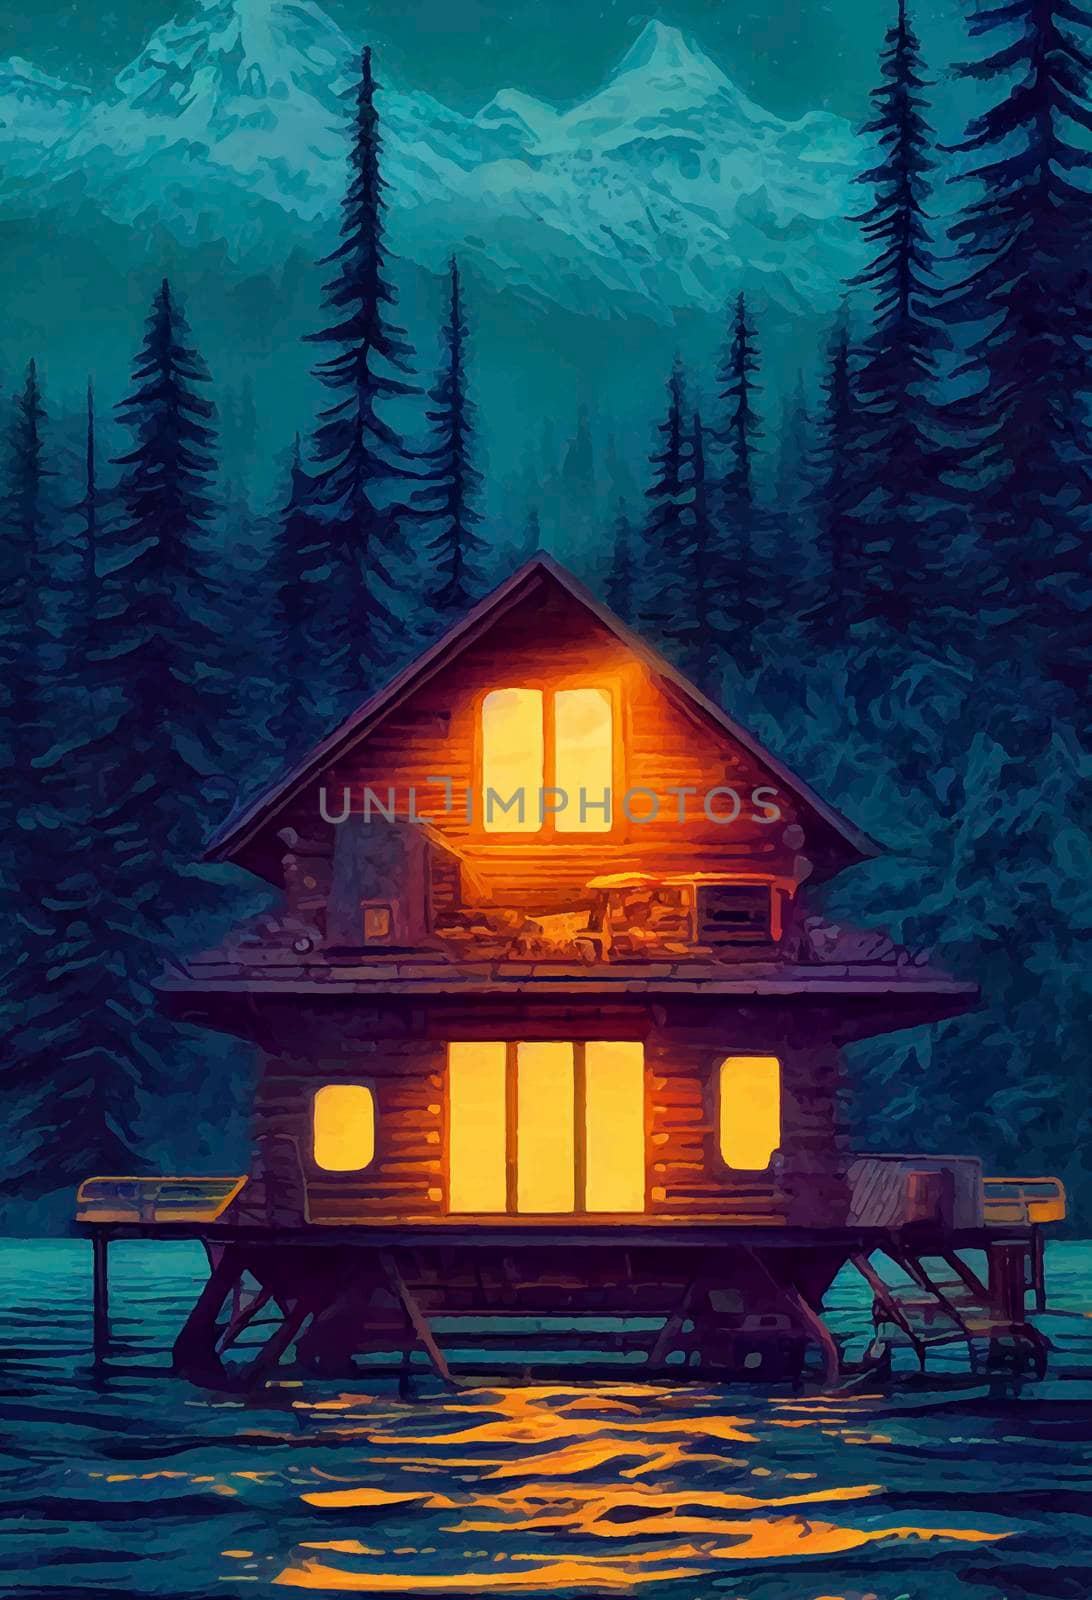 illustration of lakeside cabin in the forest, with pine trees in the background by JpRamos